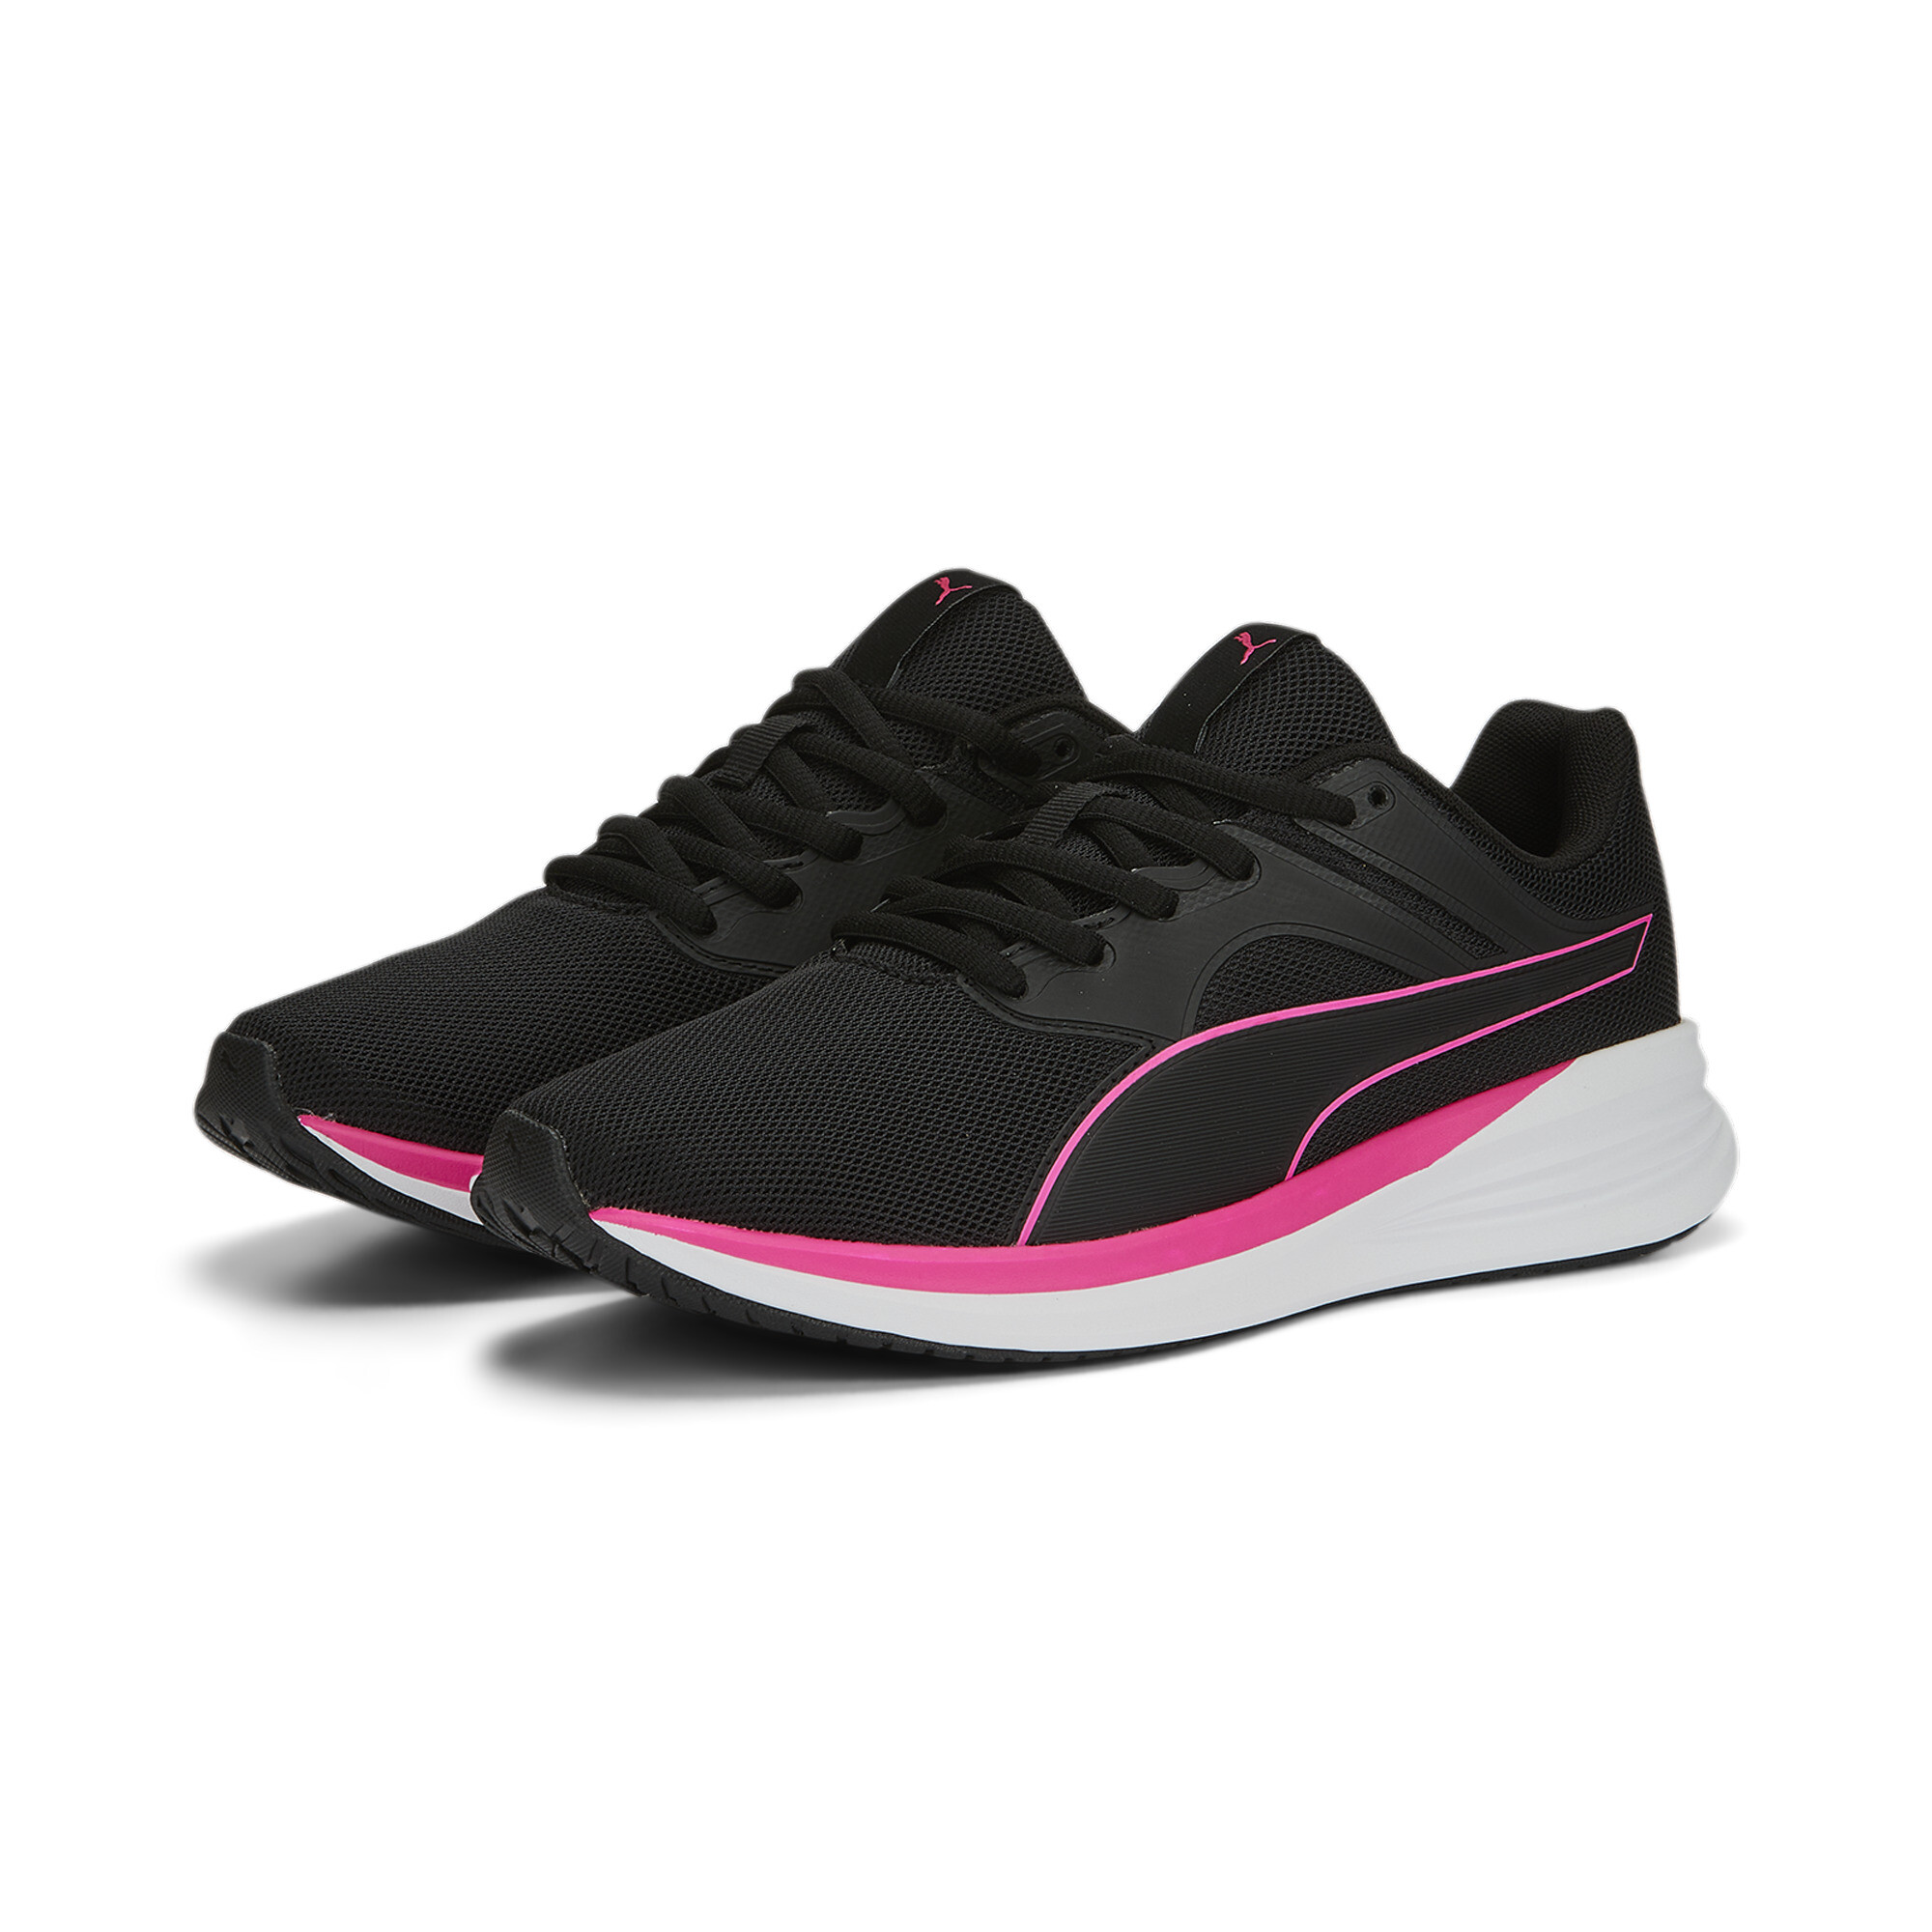 Puma Transport Running Shoes, Black, Size 40.5, Shoes